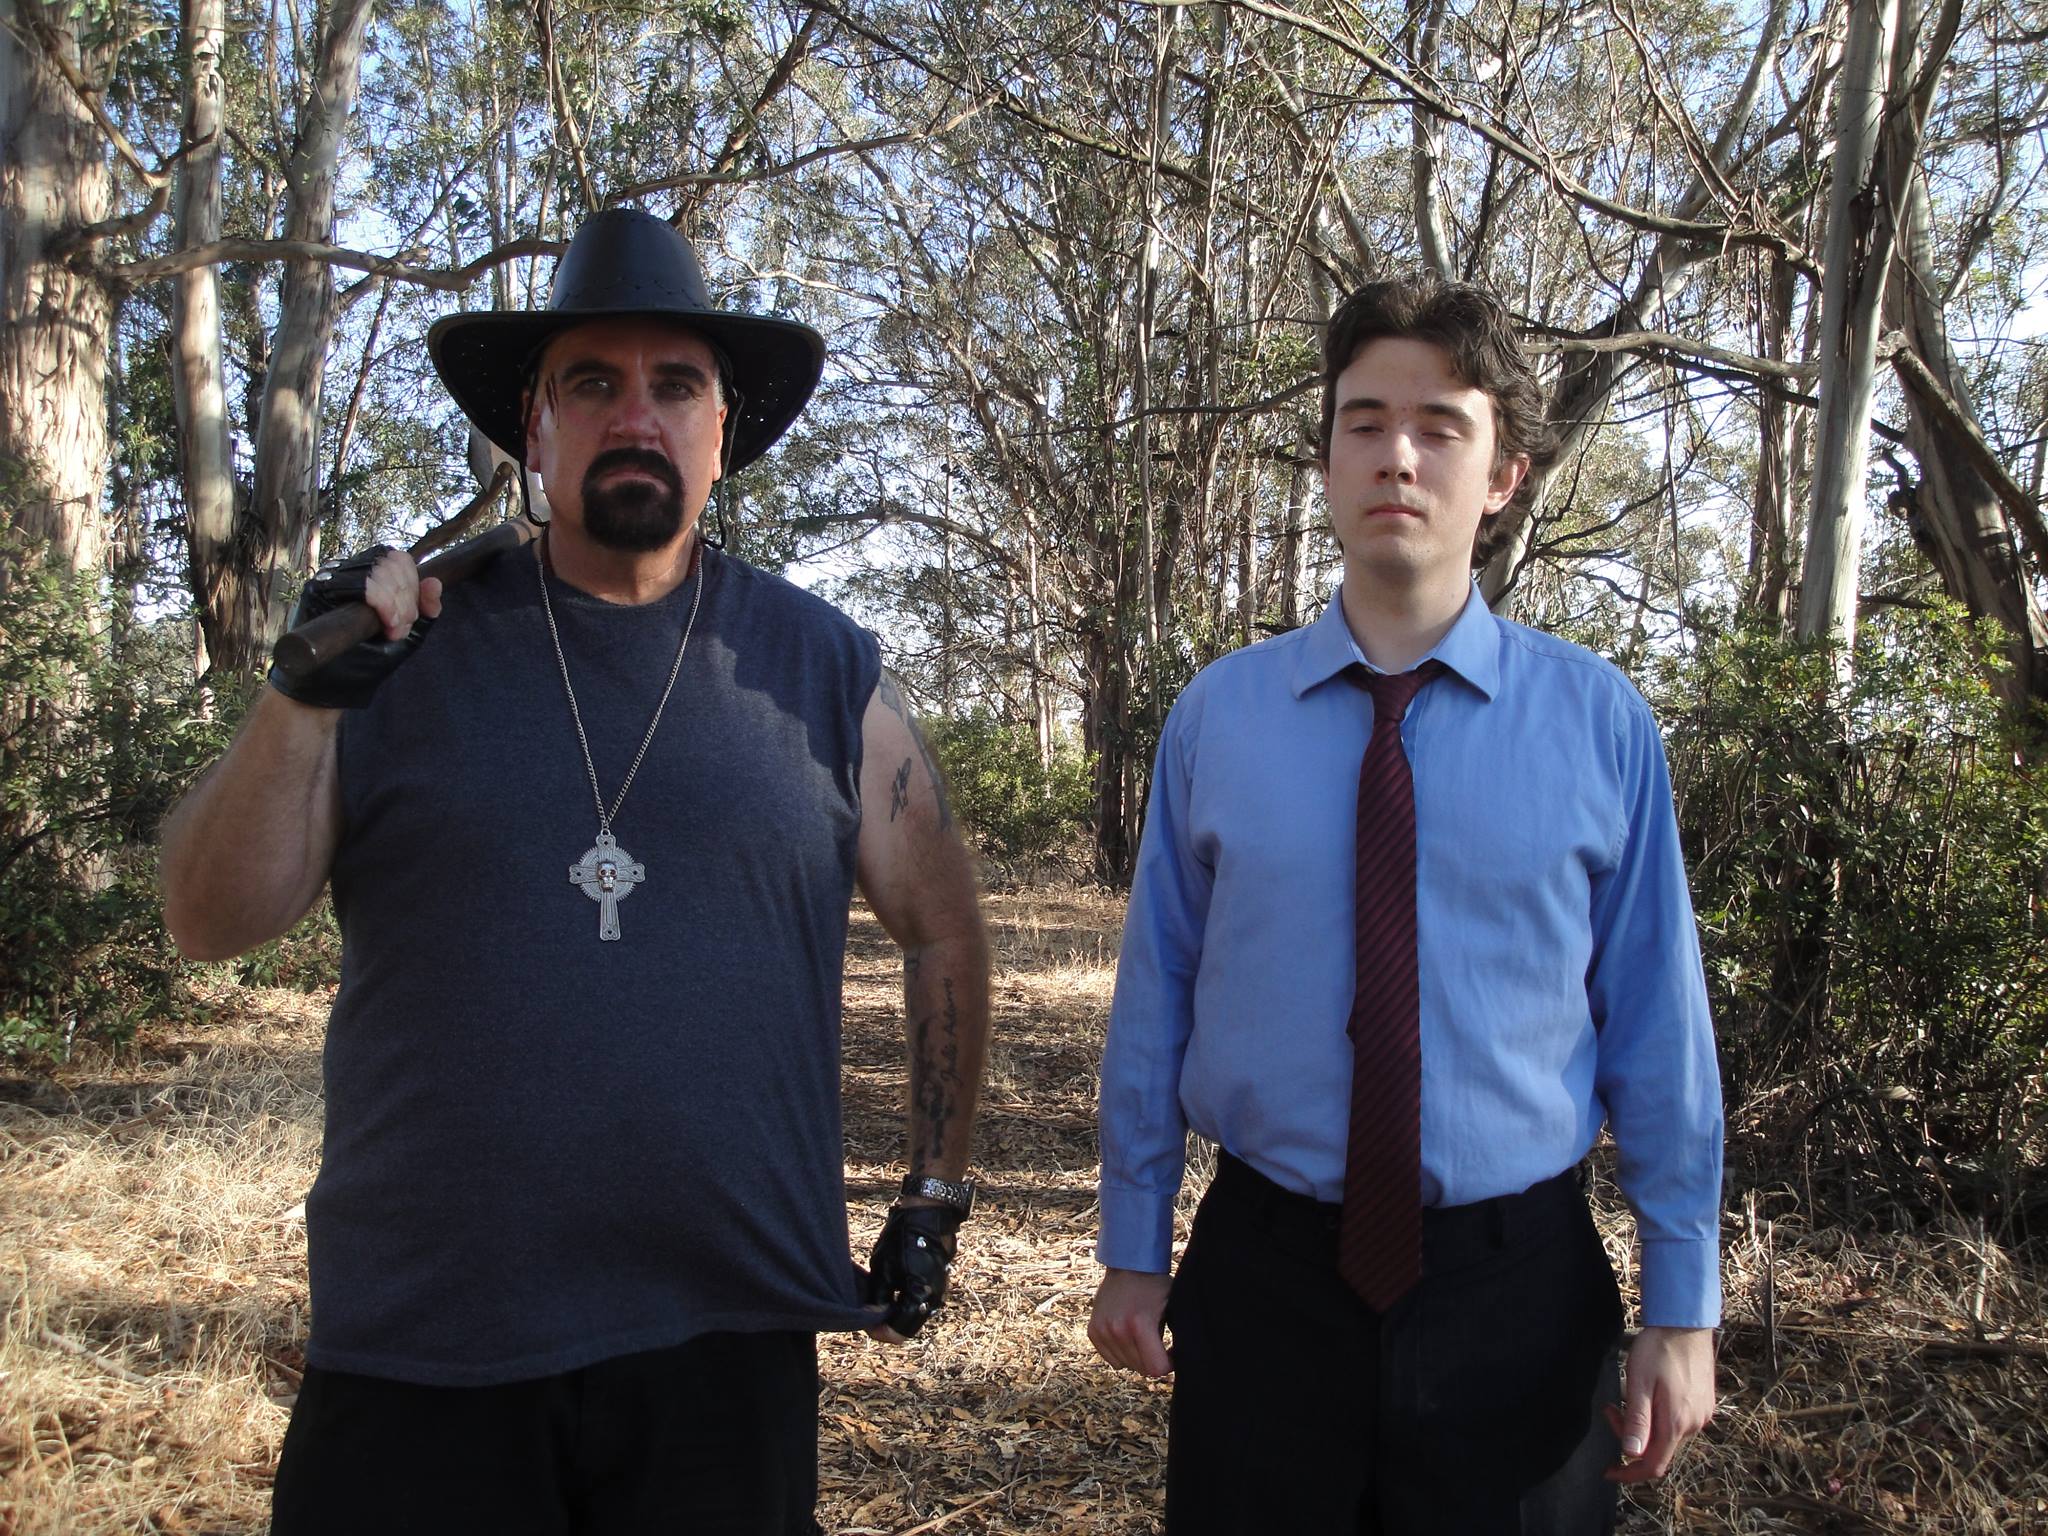 Mr. B and Detective Simmers on the set of 